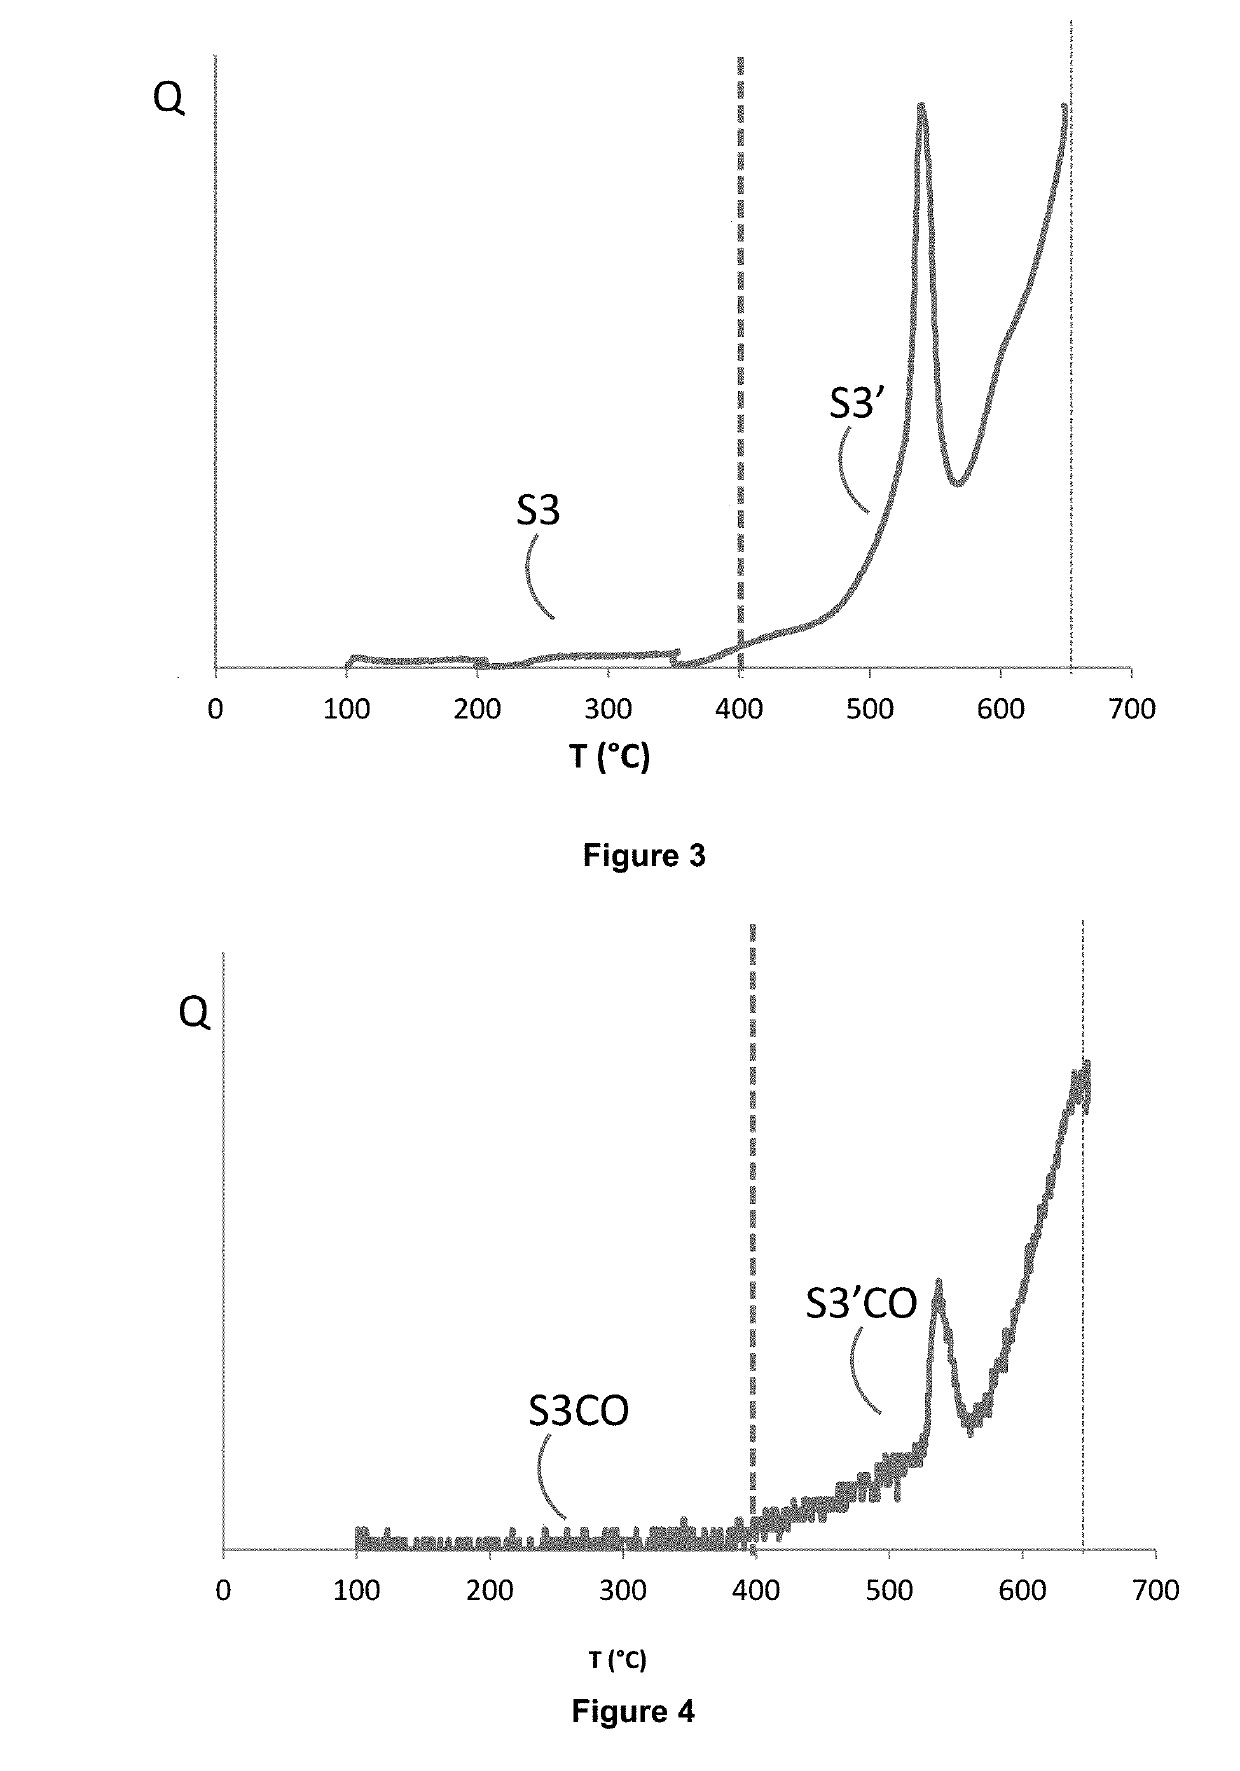 Method for estimating the quantity of free hydrocarbons in a sample of sedimentary rock